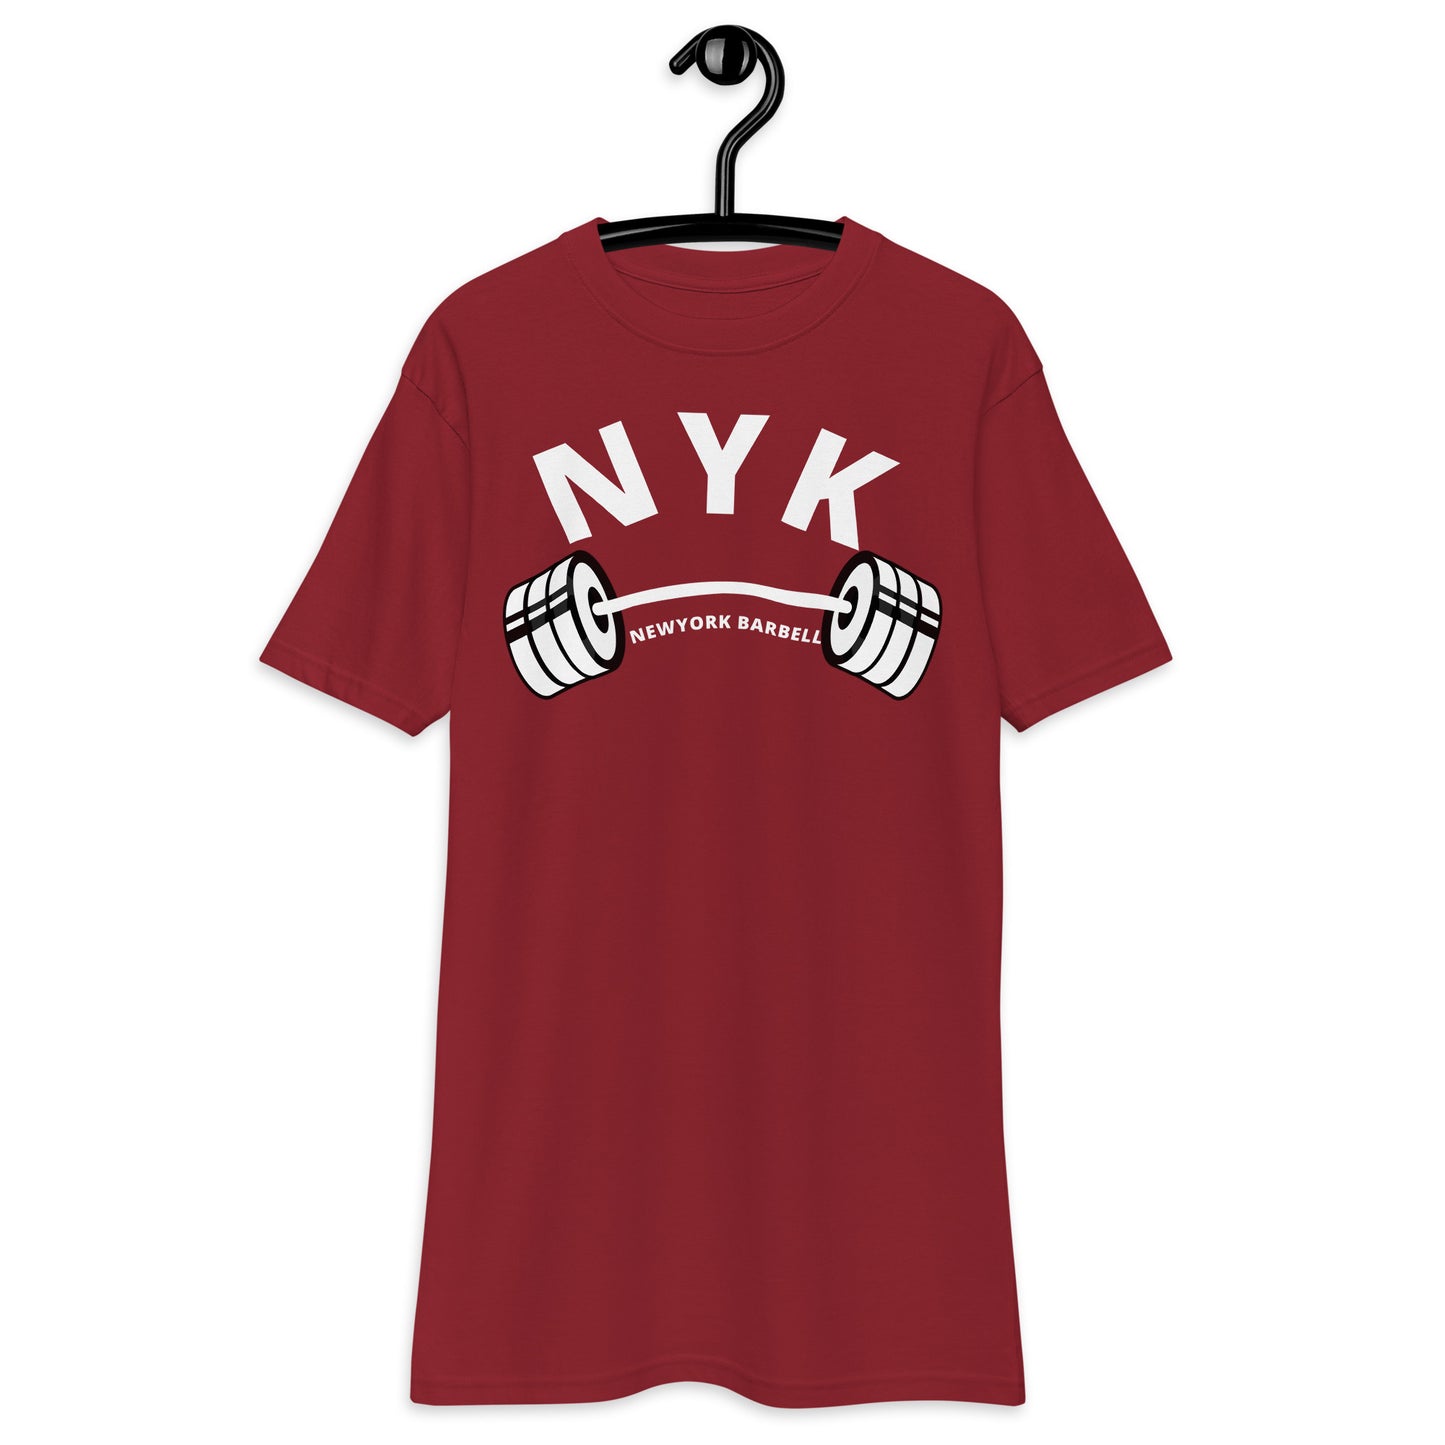 men tshirts - barbell - tees - graphic tees - newyork - gym - workout - online shopping